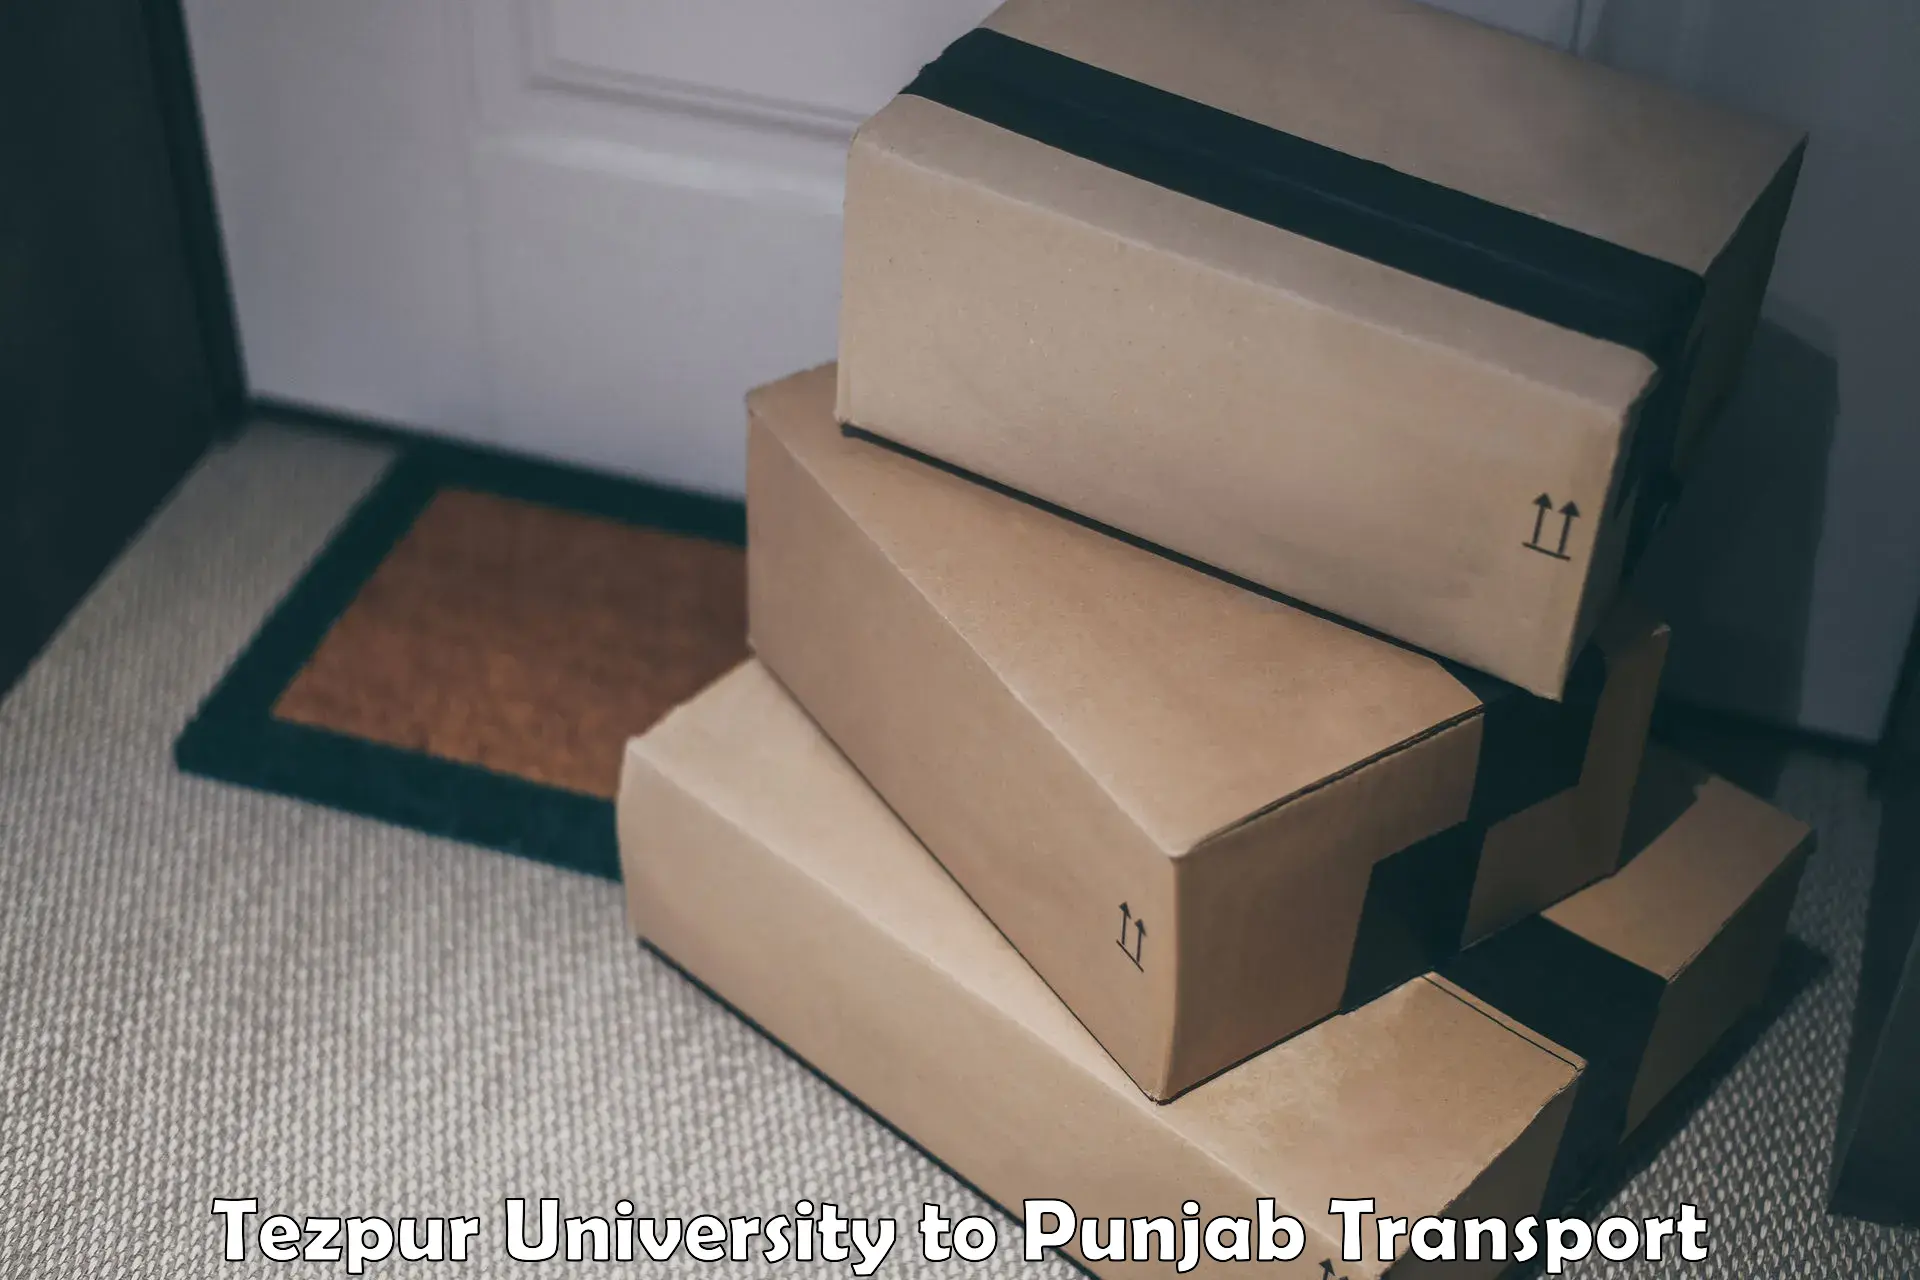 Material transport services Tezpur University to Mohali